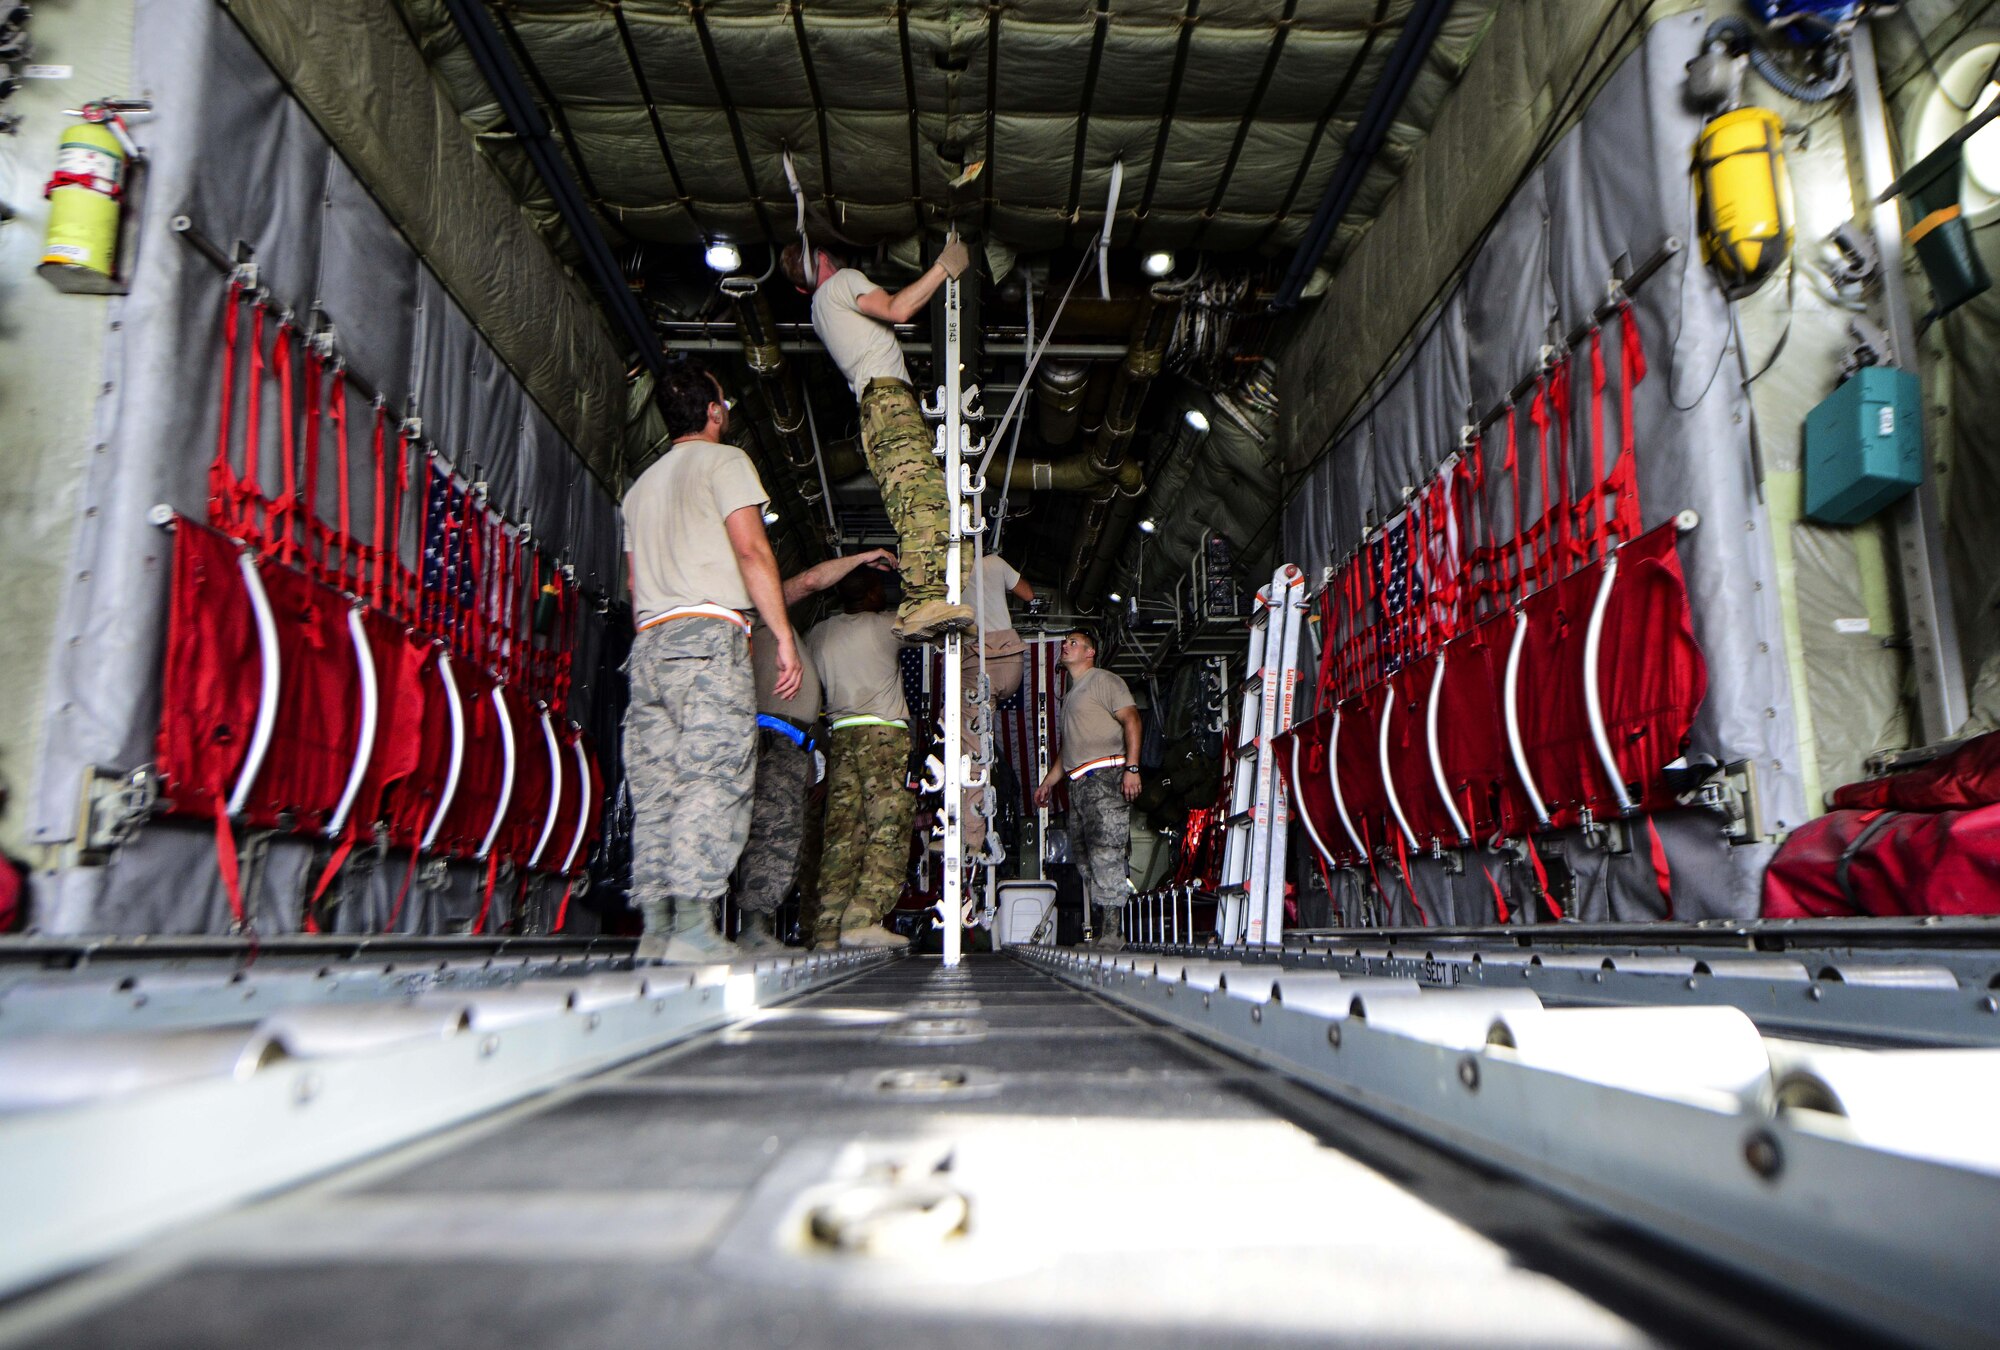 Airmen from the 746th Expeditionary Airlift Squadron and 746th Expeditionary Aircraft Maintenance Unit set up the C-130 Hercules prior to cargo and passengers arriving July 28, 2016, at Al Udeid Air Base, Qatar. The aeromedical equipment team along with the aeromedical evacuation operations team configures the aircraft prior to every mission by setting up the stations and dropping the straps for incoming patients and equipment to be stored during the flight. (U.S. Air Force photo/Senior Airman Janelle Patiño/Released)